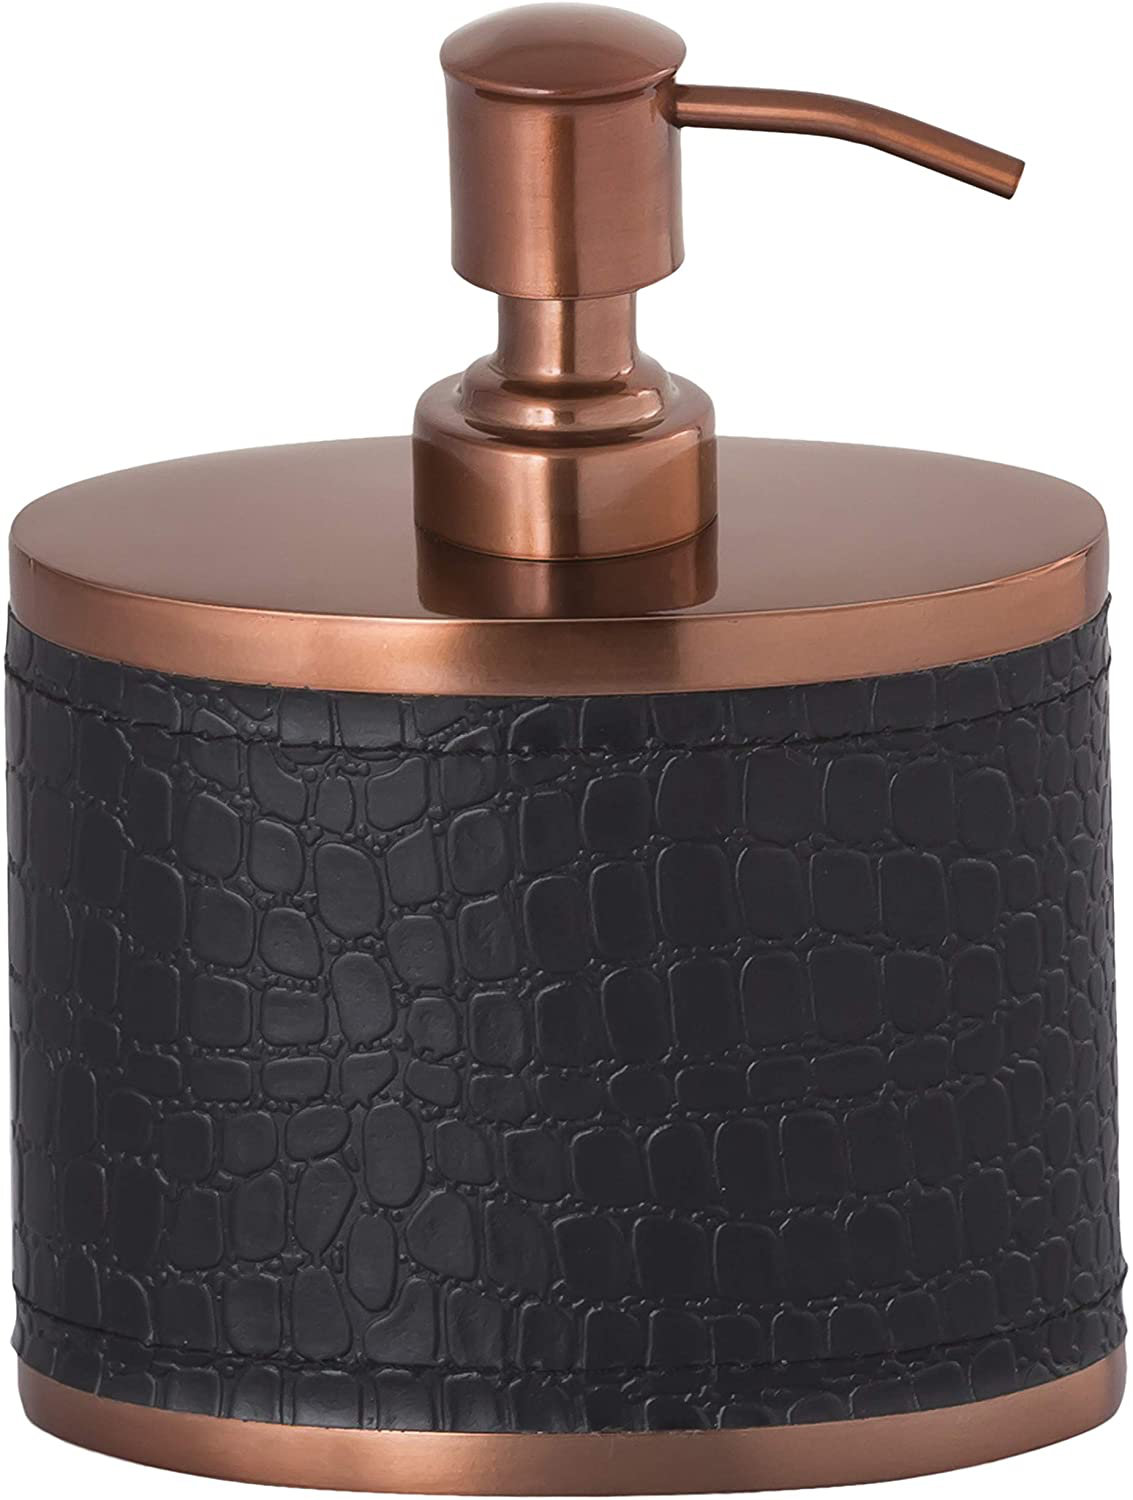 Toothbrush Holder Copper with Faux Gator Wrap Finish Heavyweight Brass 